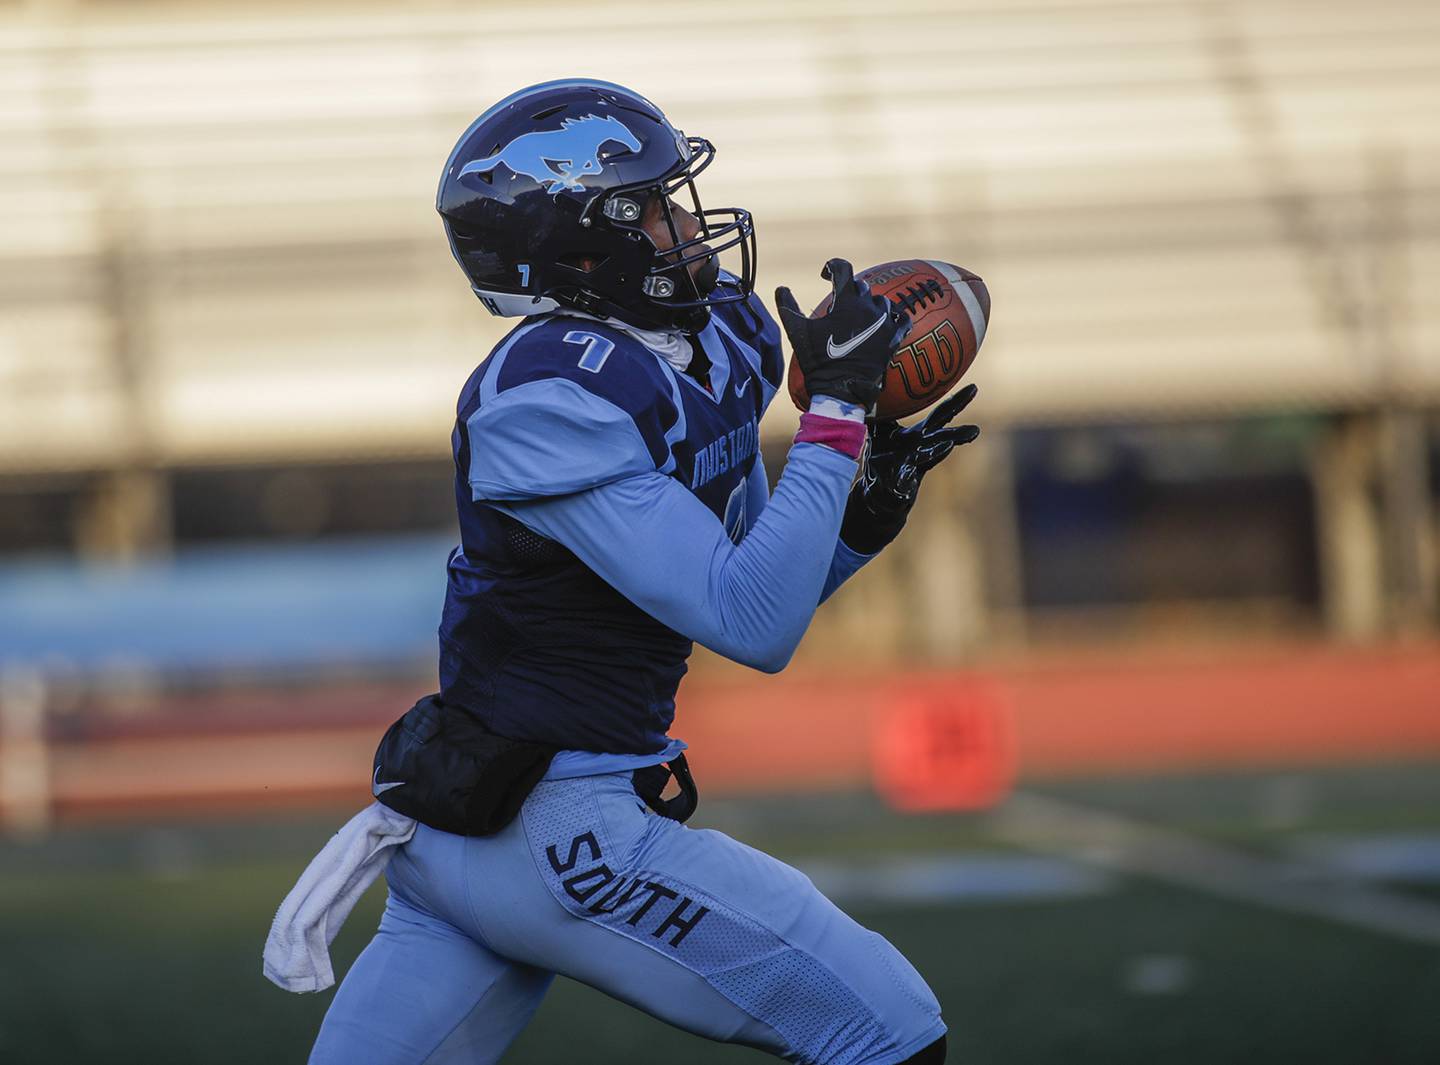 Downers Grove South’s Eli Reed catches a pass before running in for a touchdown against Addison Trail in Downers Grove April 1.